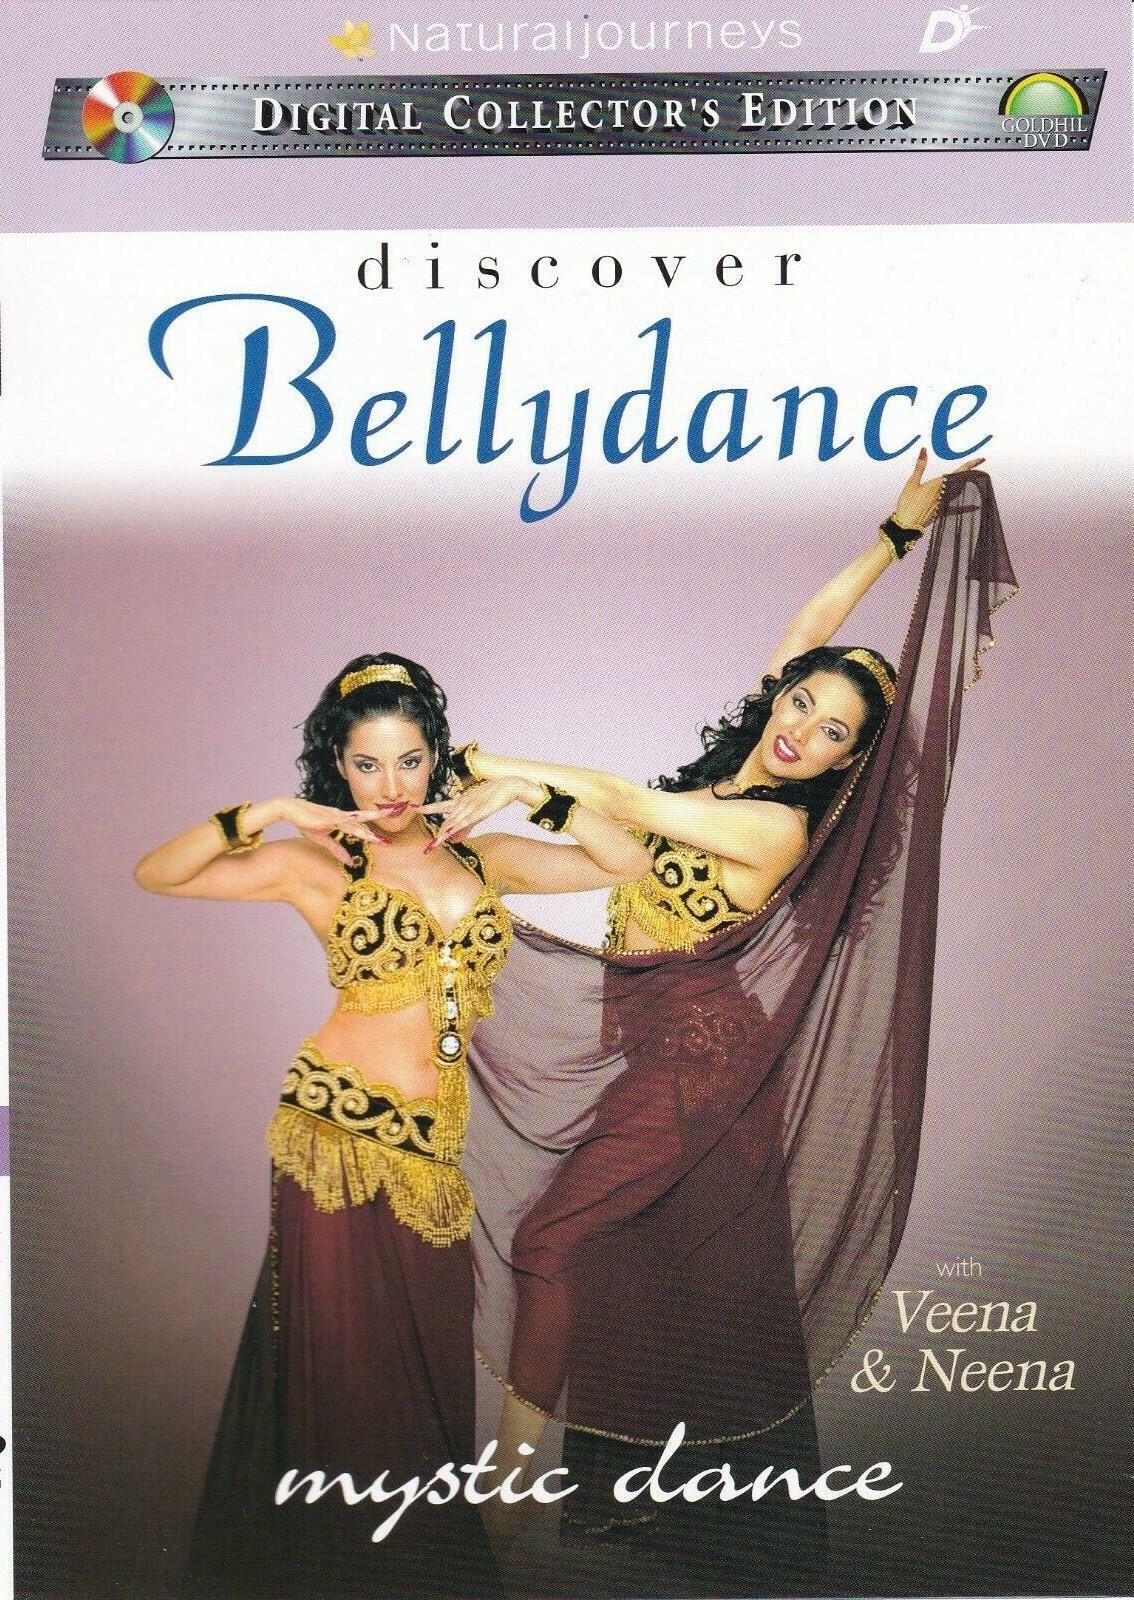 The Sensual Art of Bellydance - Mystic Dance (DVD, 2003) NEW - image 1 of 1